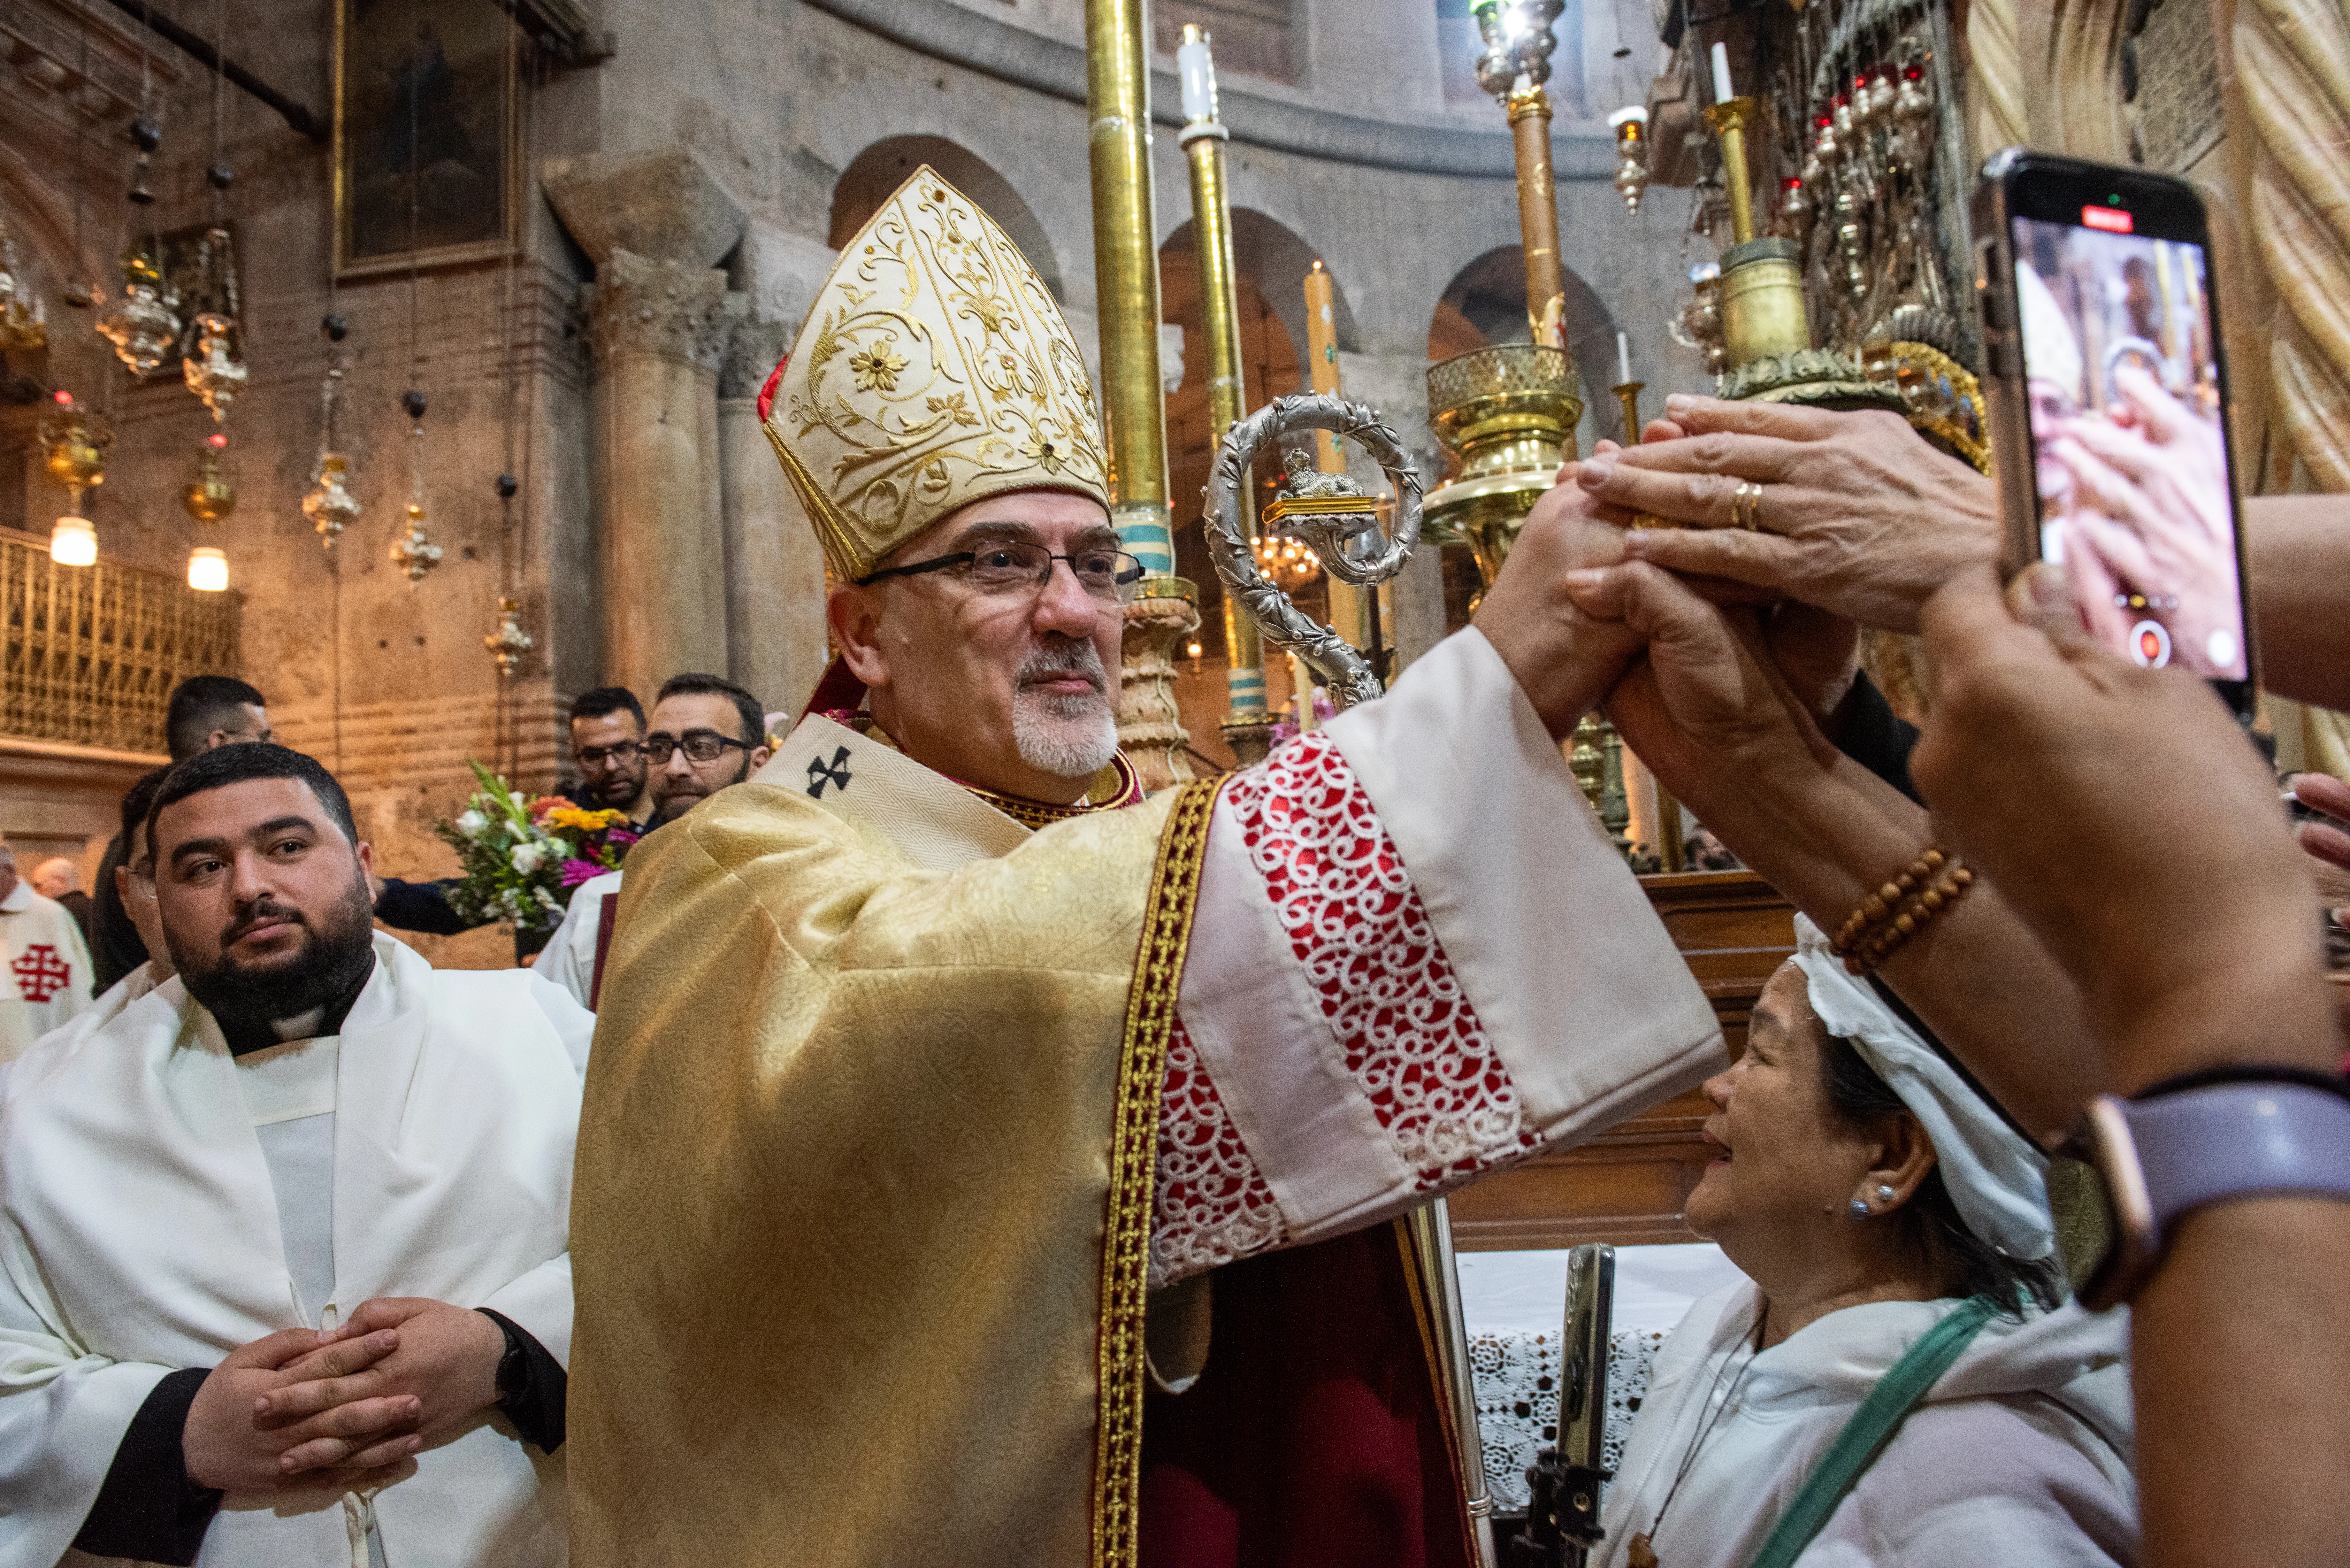 At the end of the Easter Vigil, celebrated on the morning of Saturday, March 30, 2024, in the Basilica of the Holy Sepulcher in Jerusalem, Cardinal Pierbattista Pizzaballa, the Latin Patriarch, greeted those who were present. “What I wish you all,” he said in his homily, “is to stop seeking among the dead He who is alive” but “like the women of the Gospel, may we have a renewed desire to look up. May today’s Easter be an invitation to set out, to seek the signs of His presence, which is a presence of life, love, and light.”